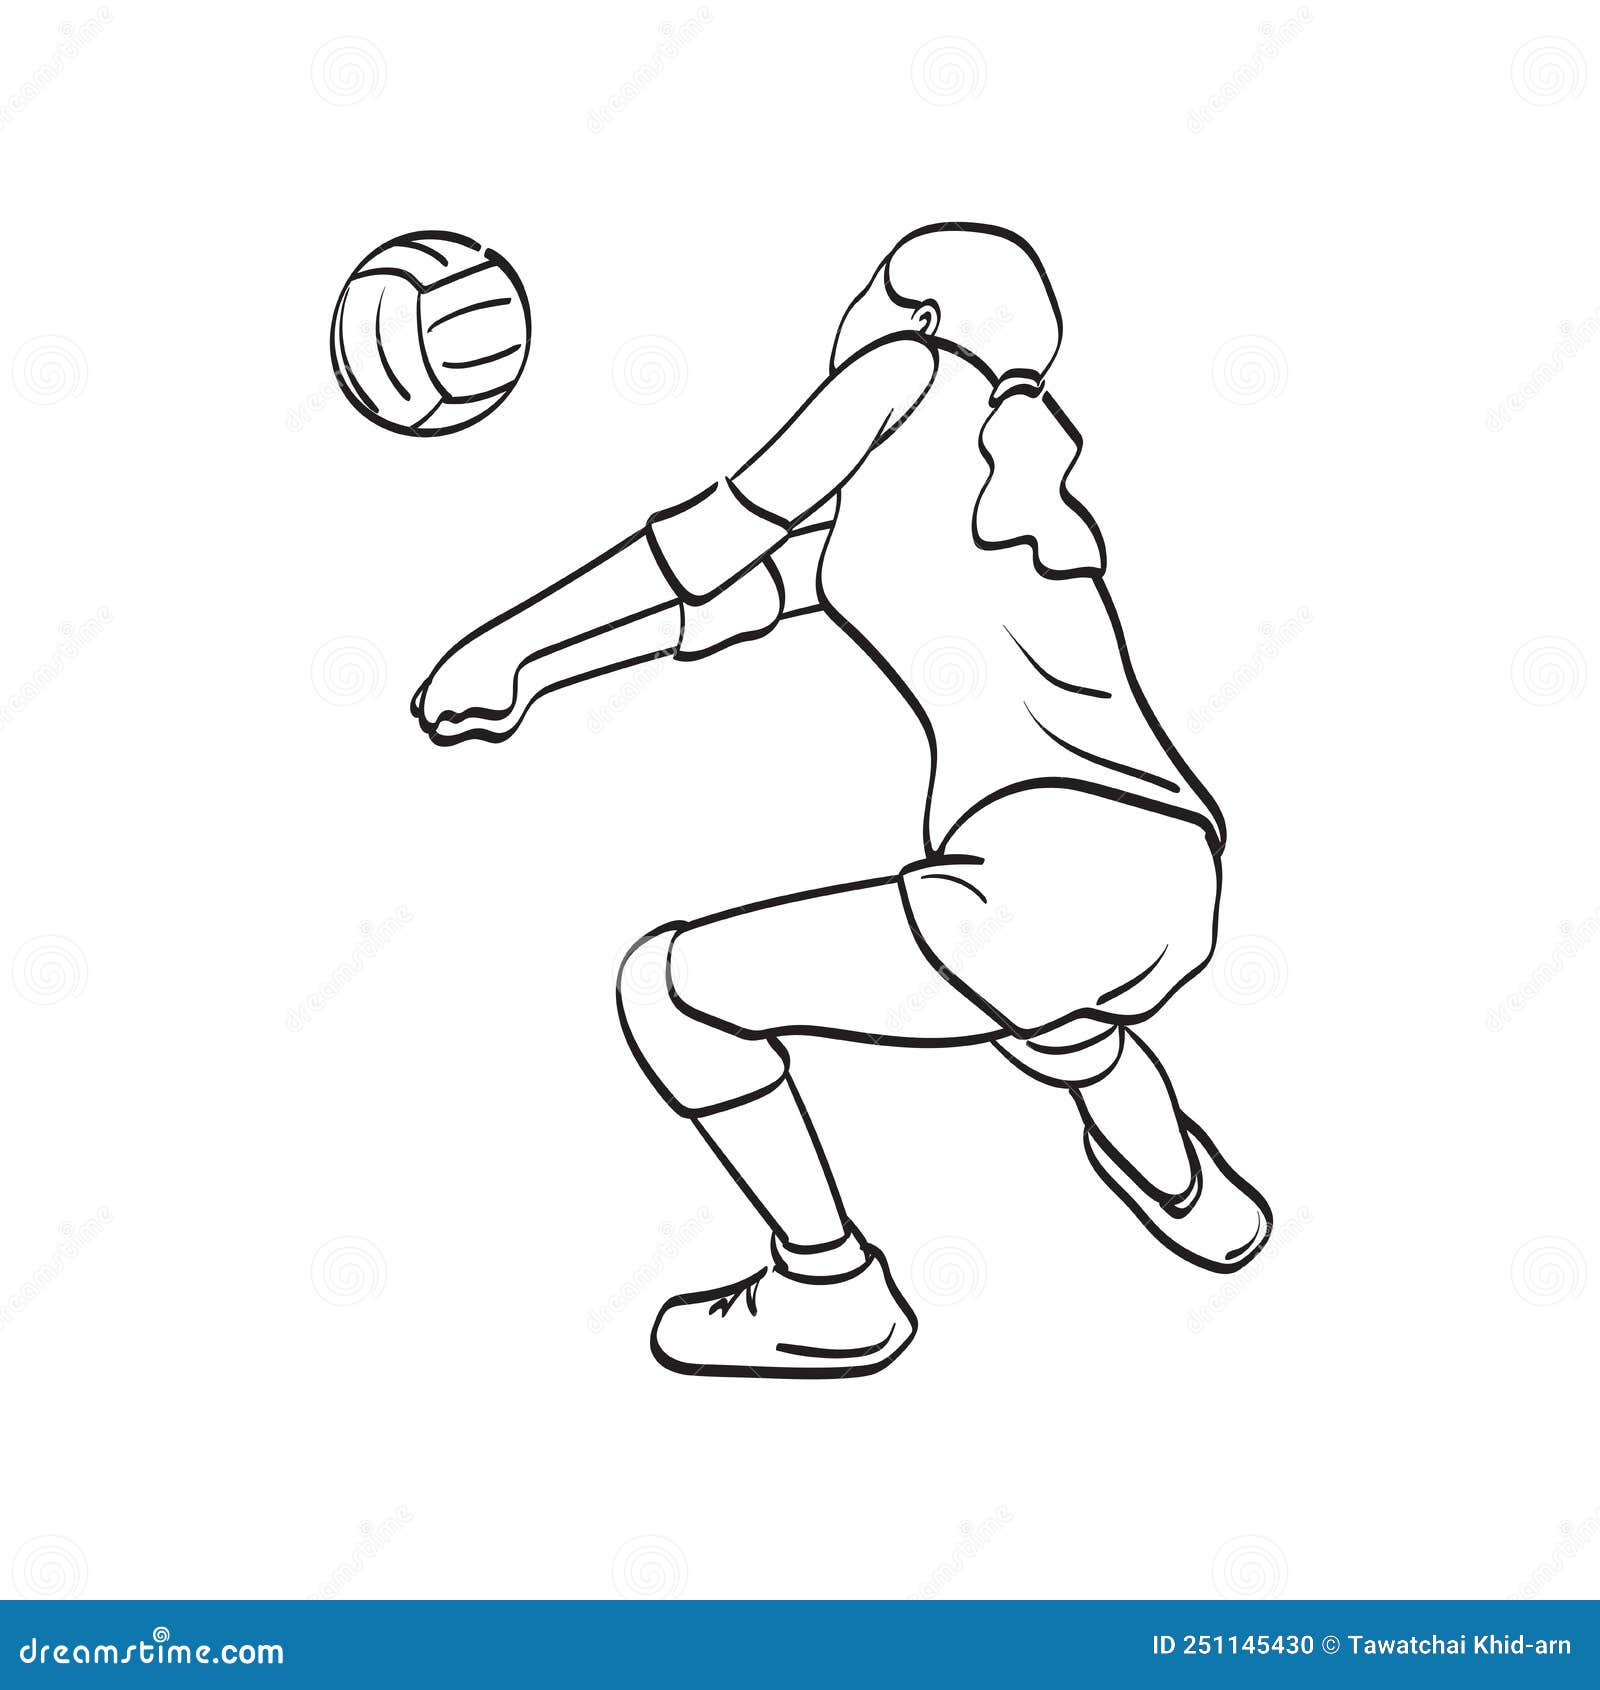 Line Art Rear View of Female Volleyball Player Illustration Vector Hand ...